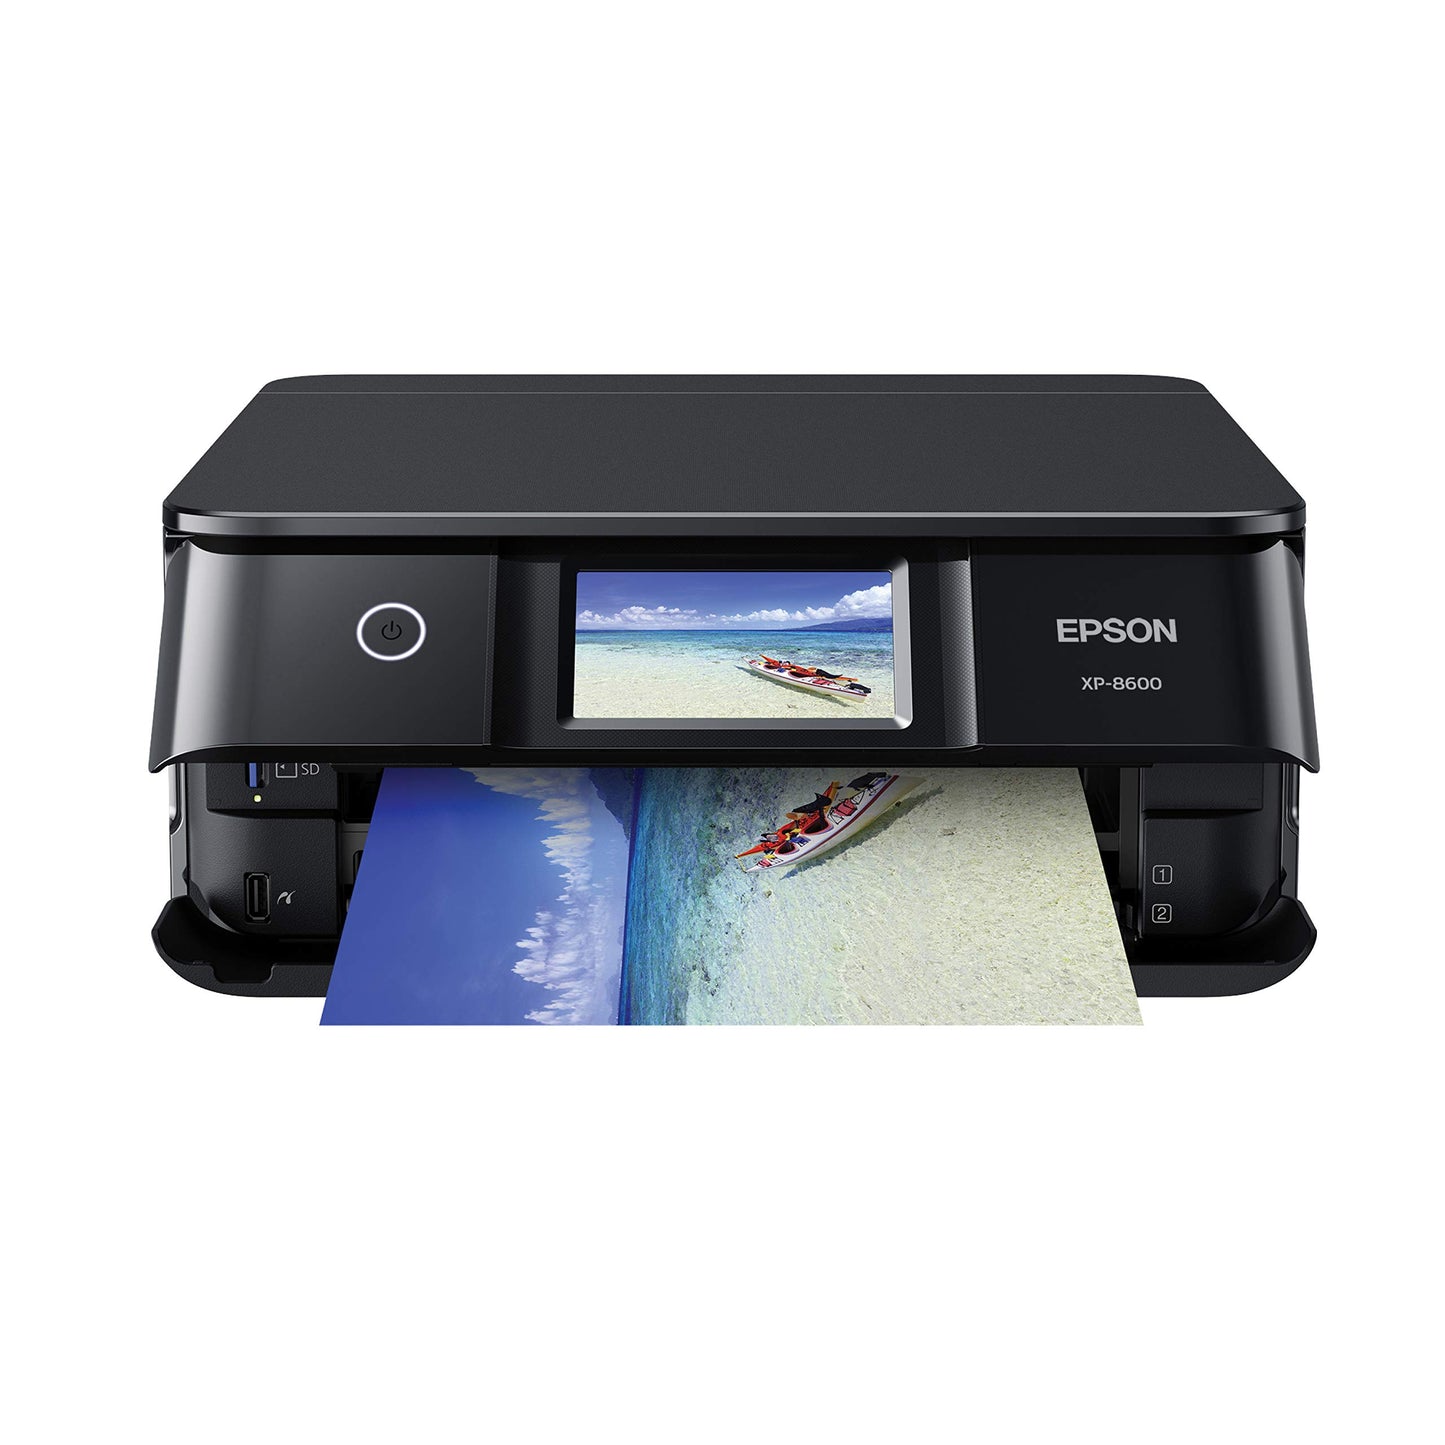 Epson Expression Photo XP-8600 Wireless Color Photo Printer with Scanner and Copier Black,Small